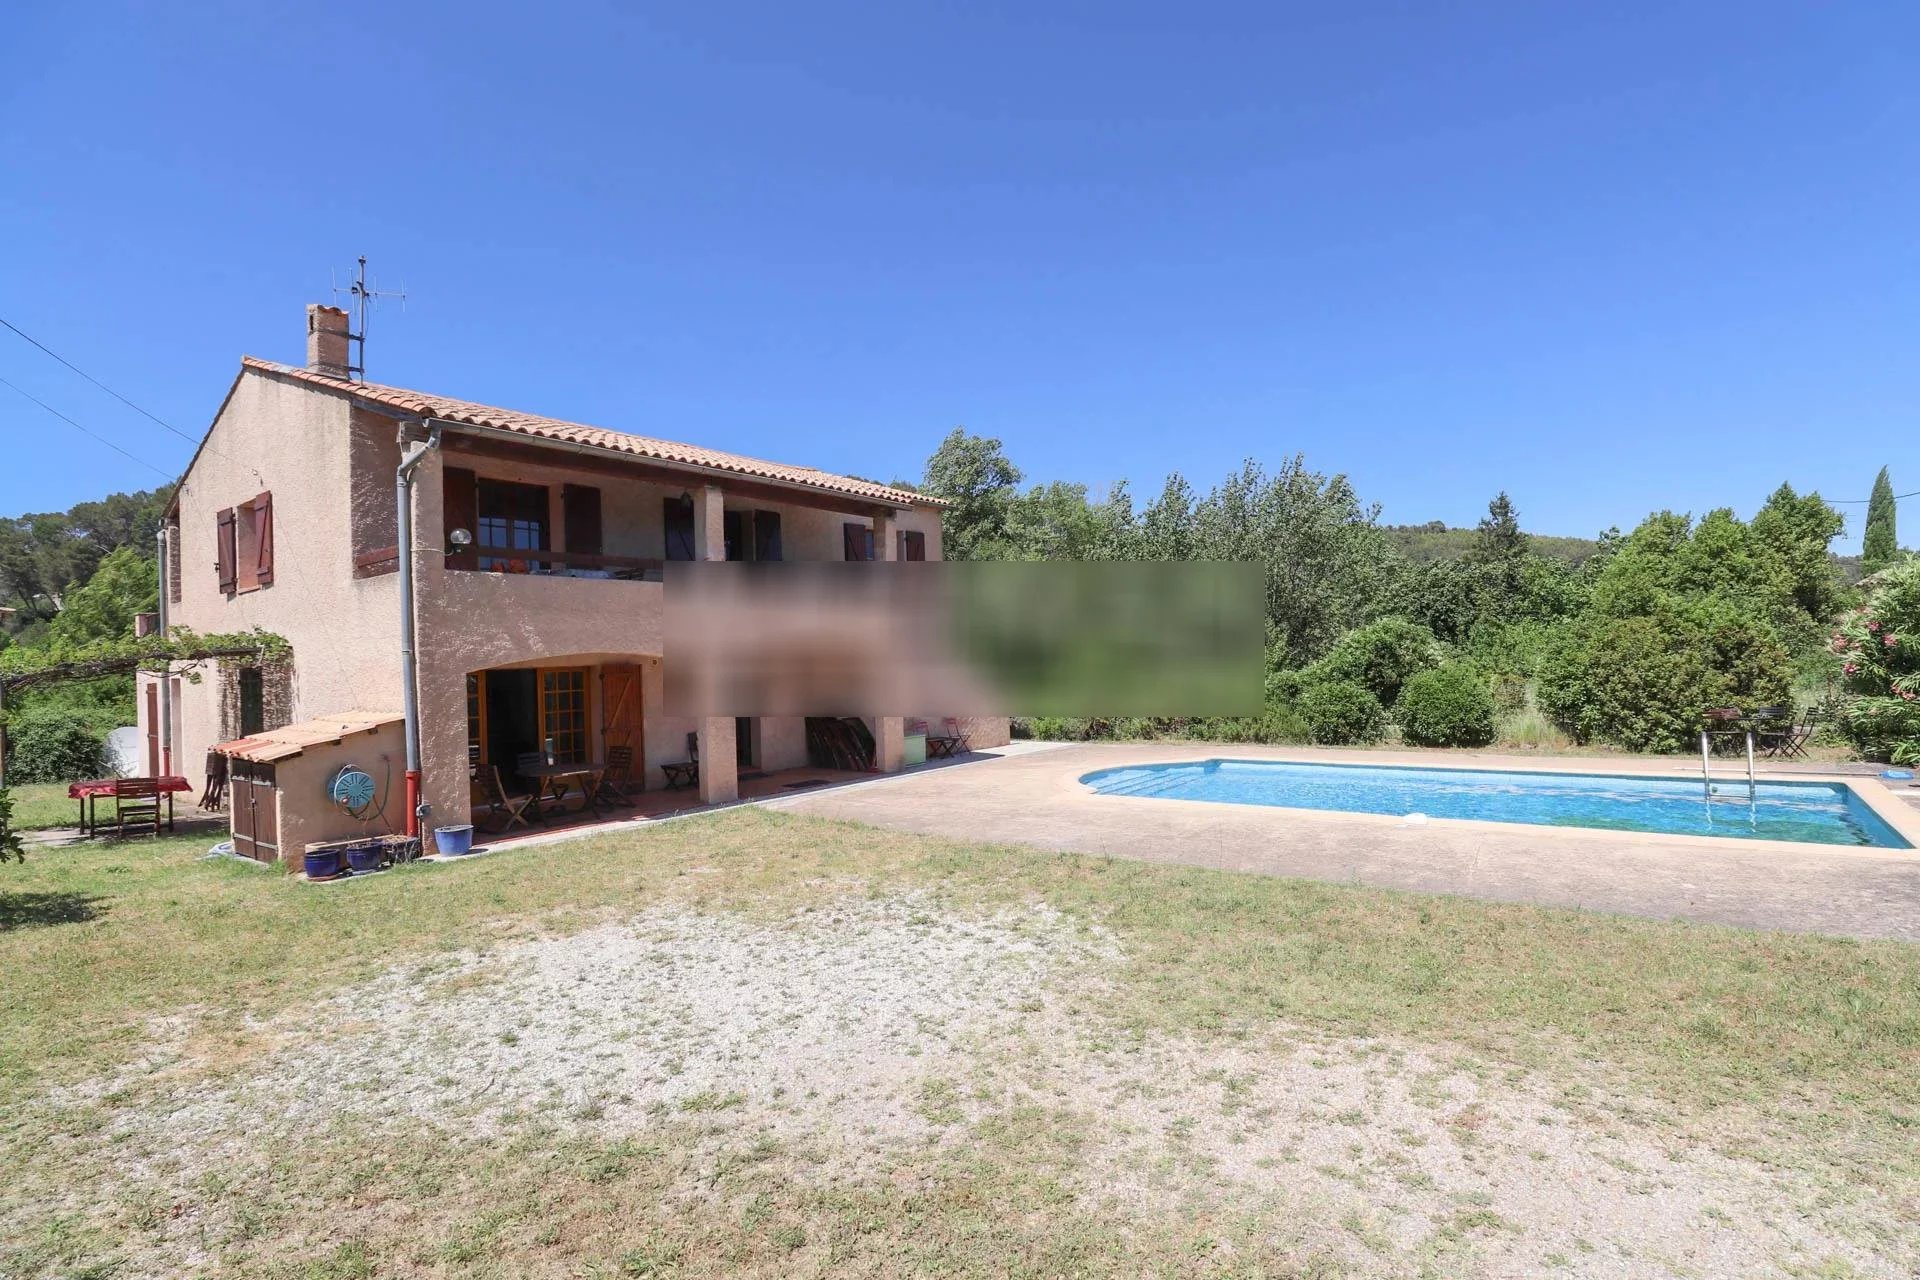 Provencal villa in a quiet residential area with a lovely view